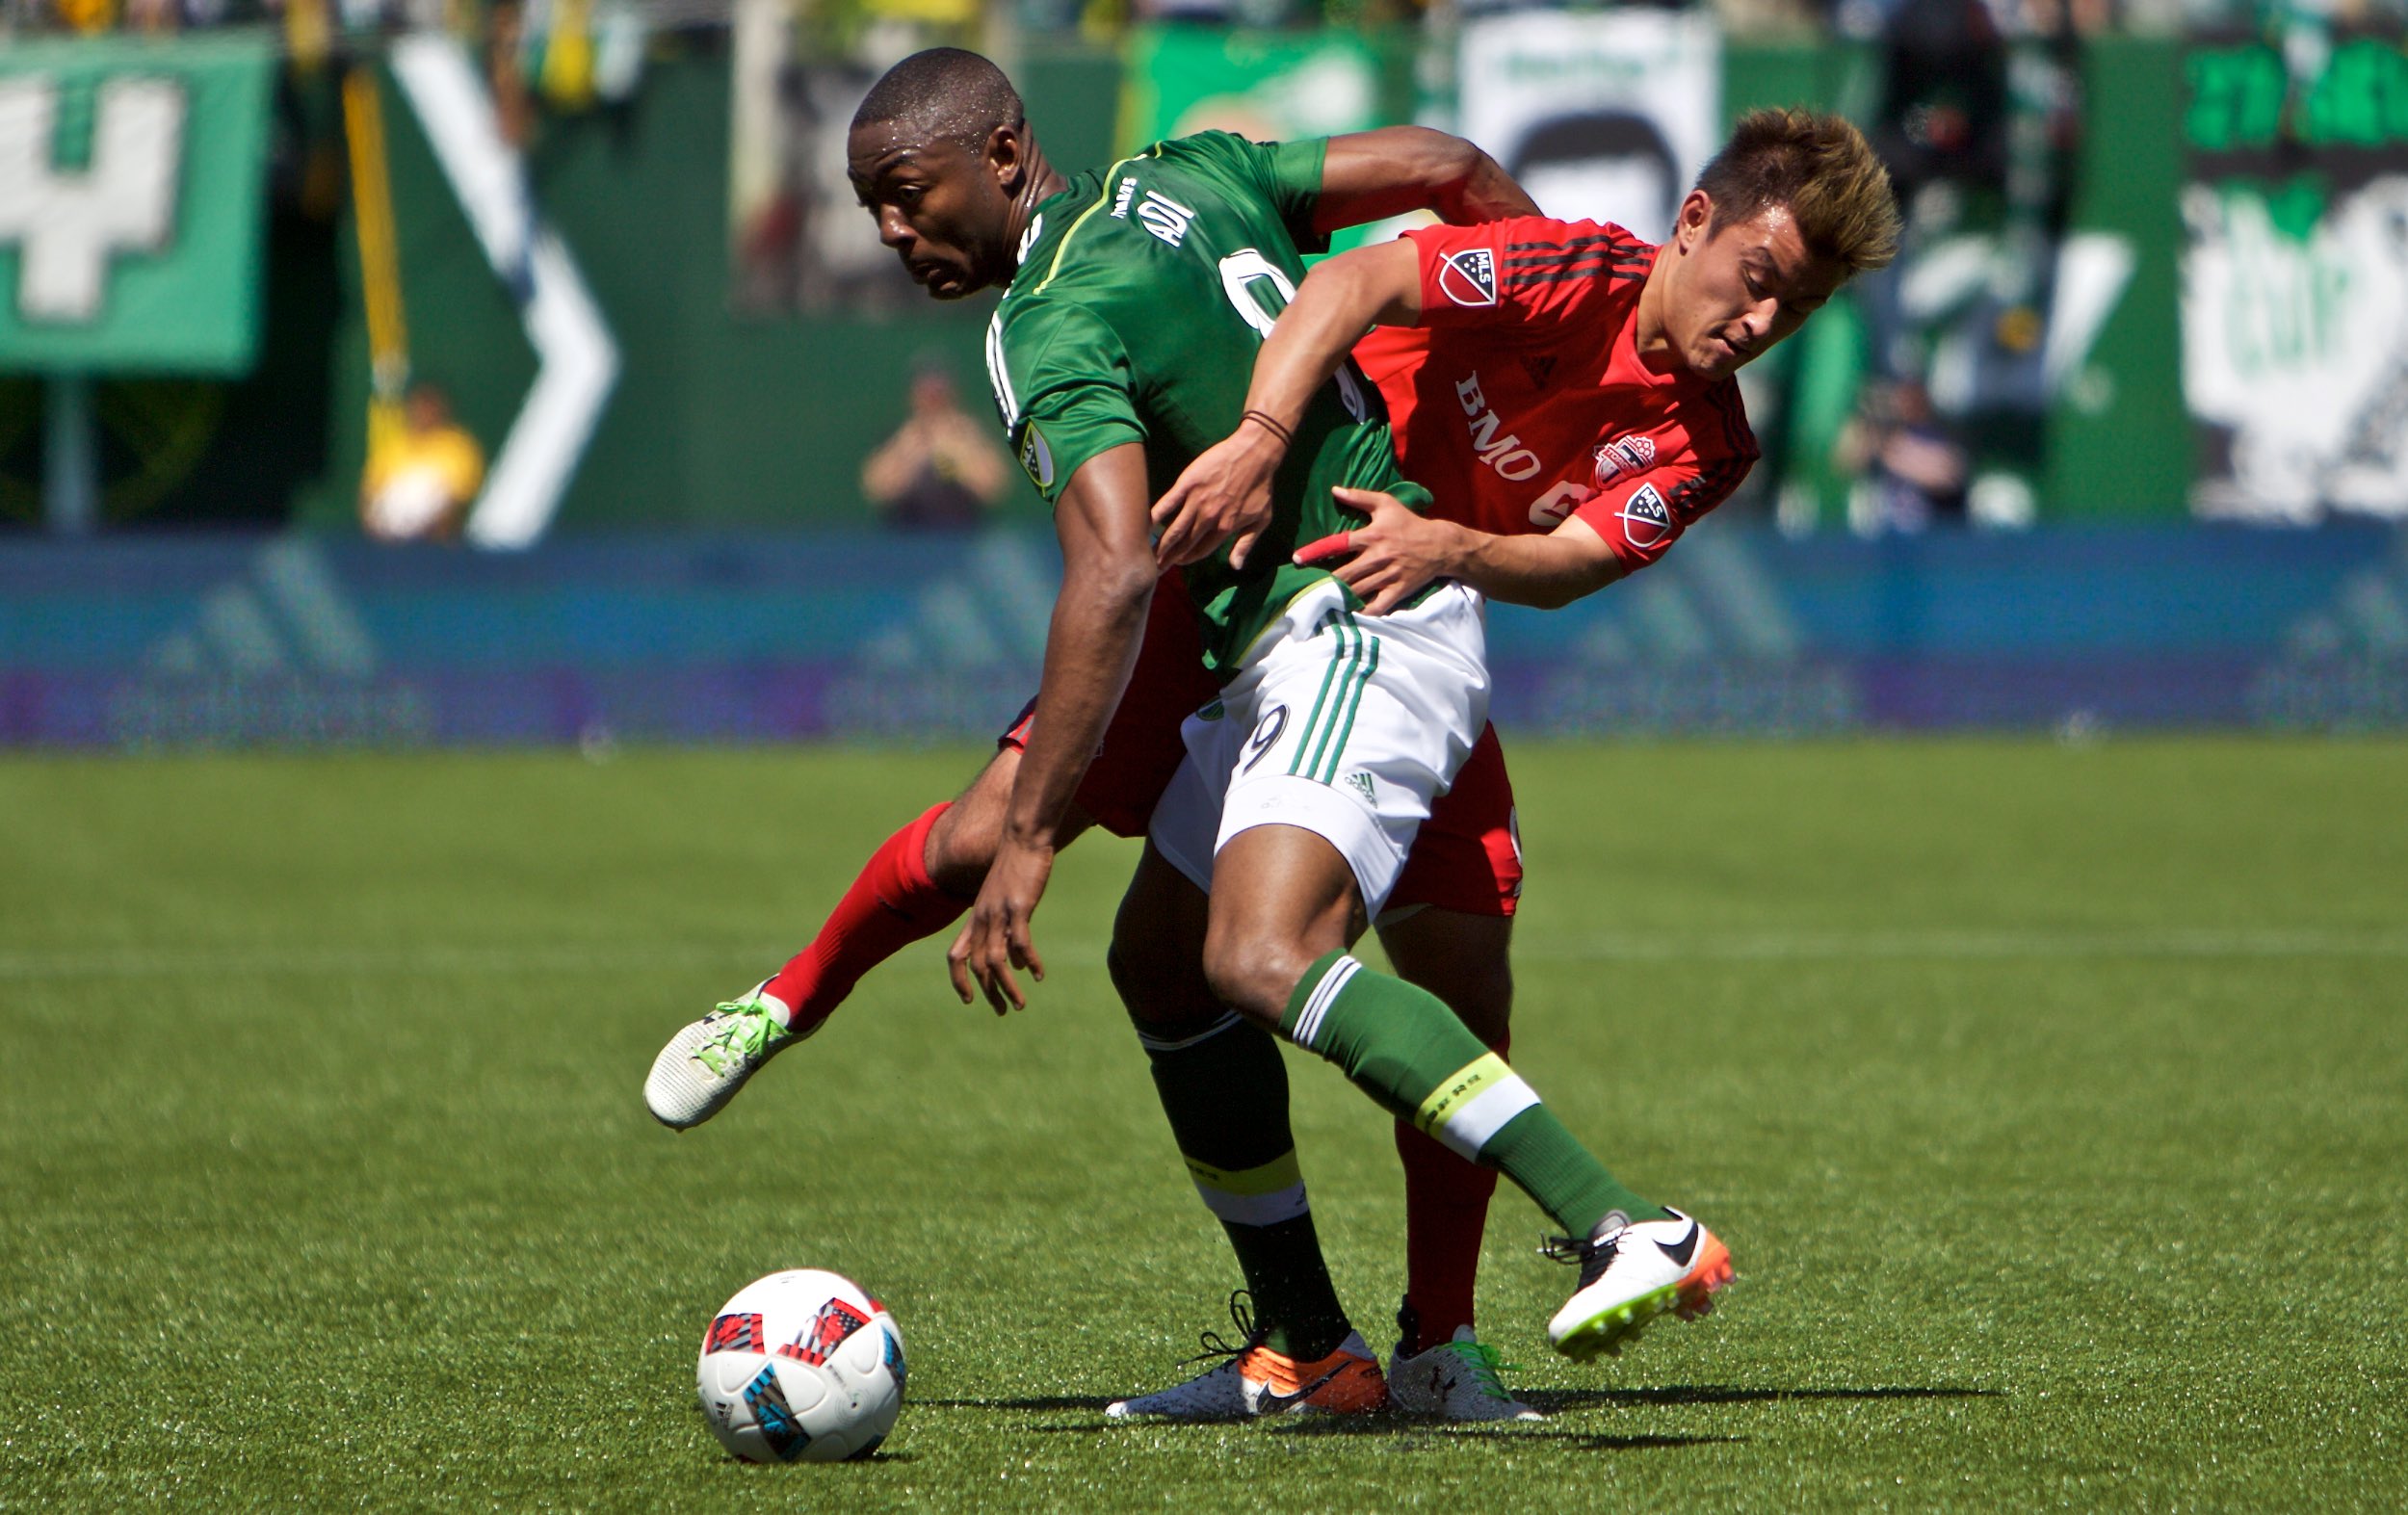 May 1, 2016; Portland, OR, USA; Portland Timbers forward Fanendo Adi (9) controls the ball in the second half at Providence Park. Photo: Craig Mitchelldyer-Portland Timbers